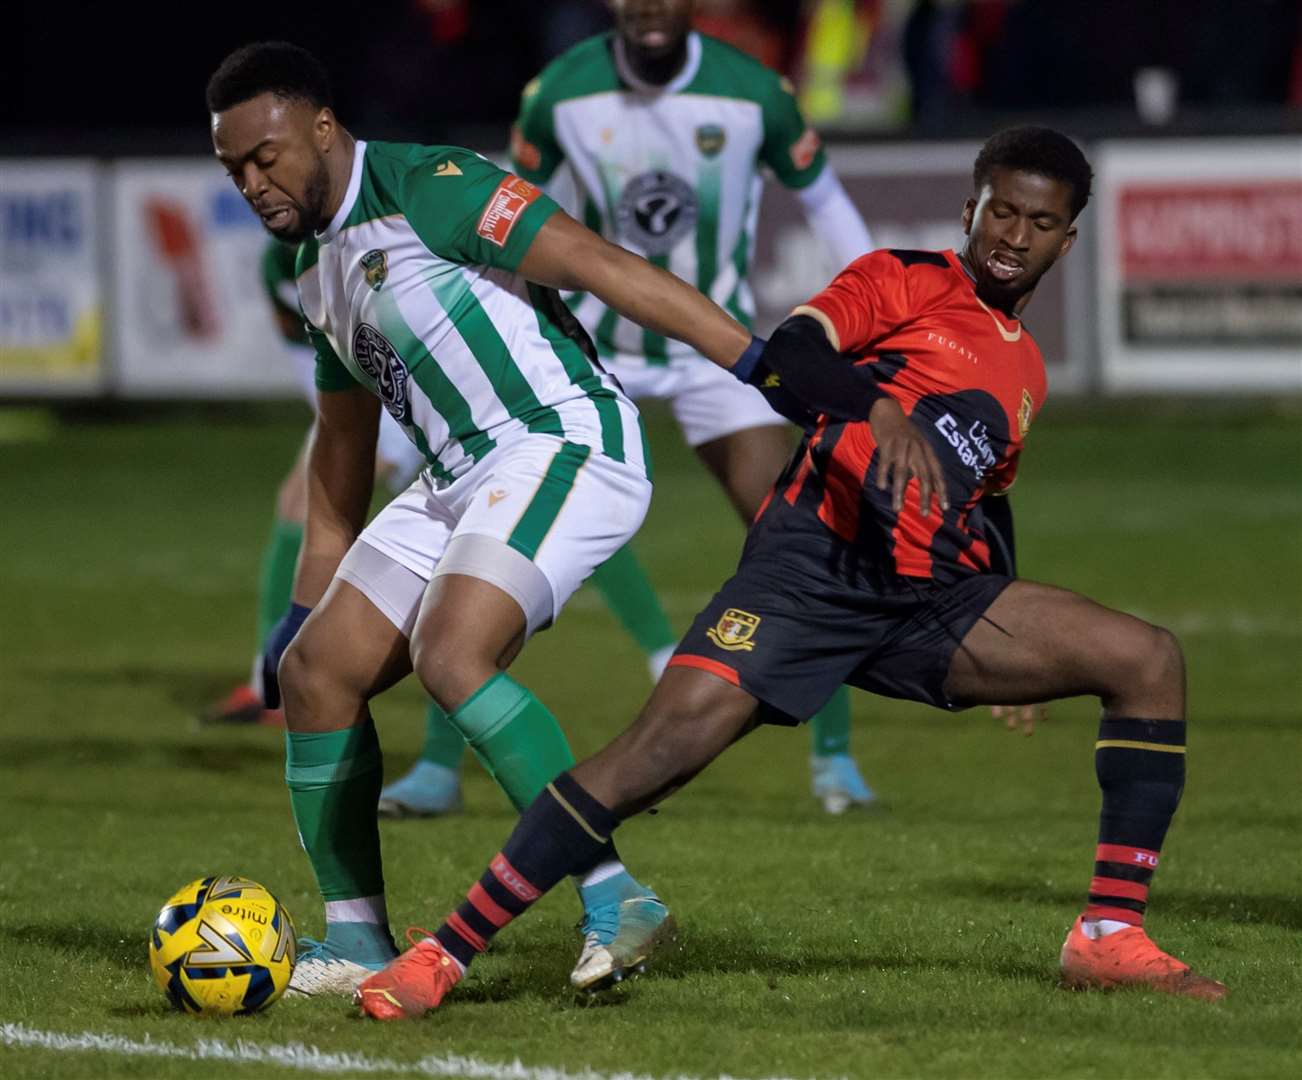 Sittingbourne defender Donvieve Jones is staying at Woodstock. Picture: Ian Scammell